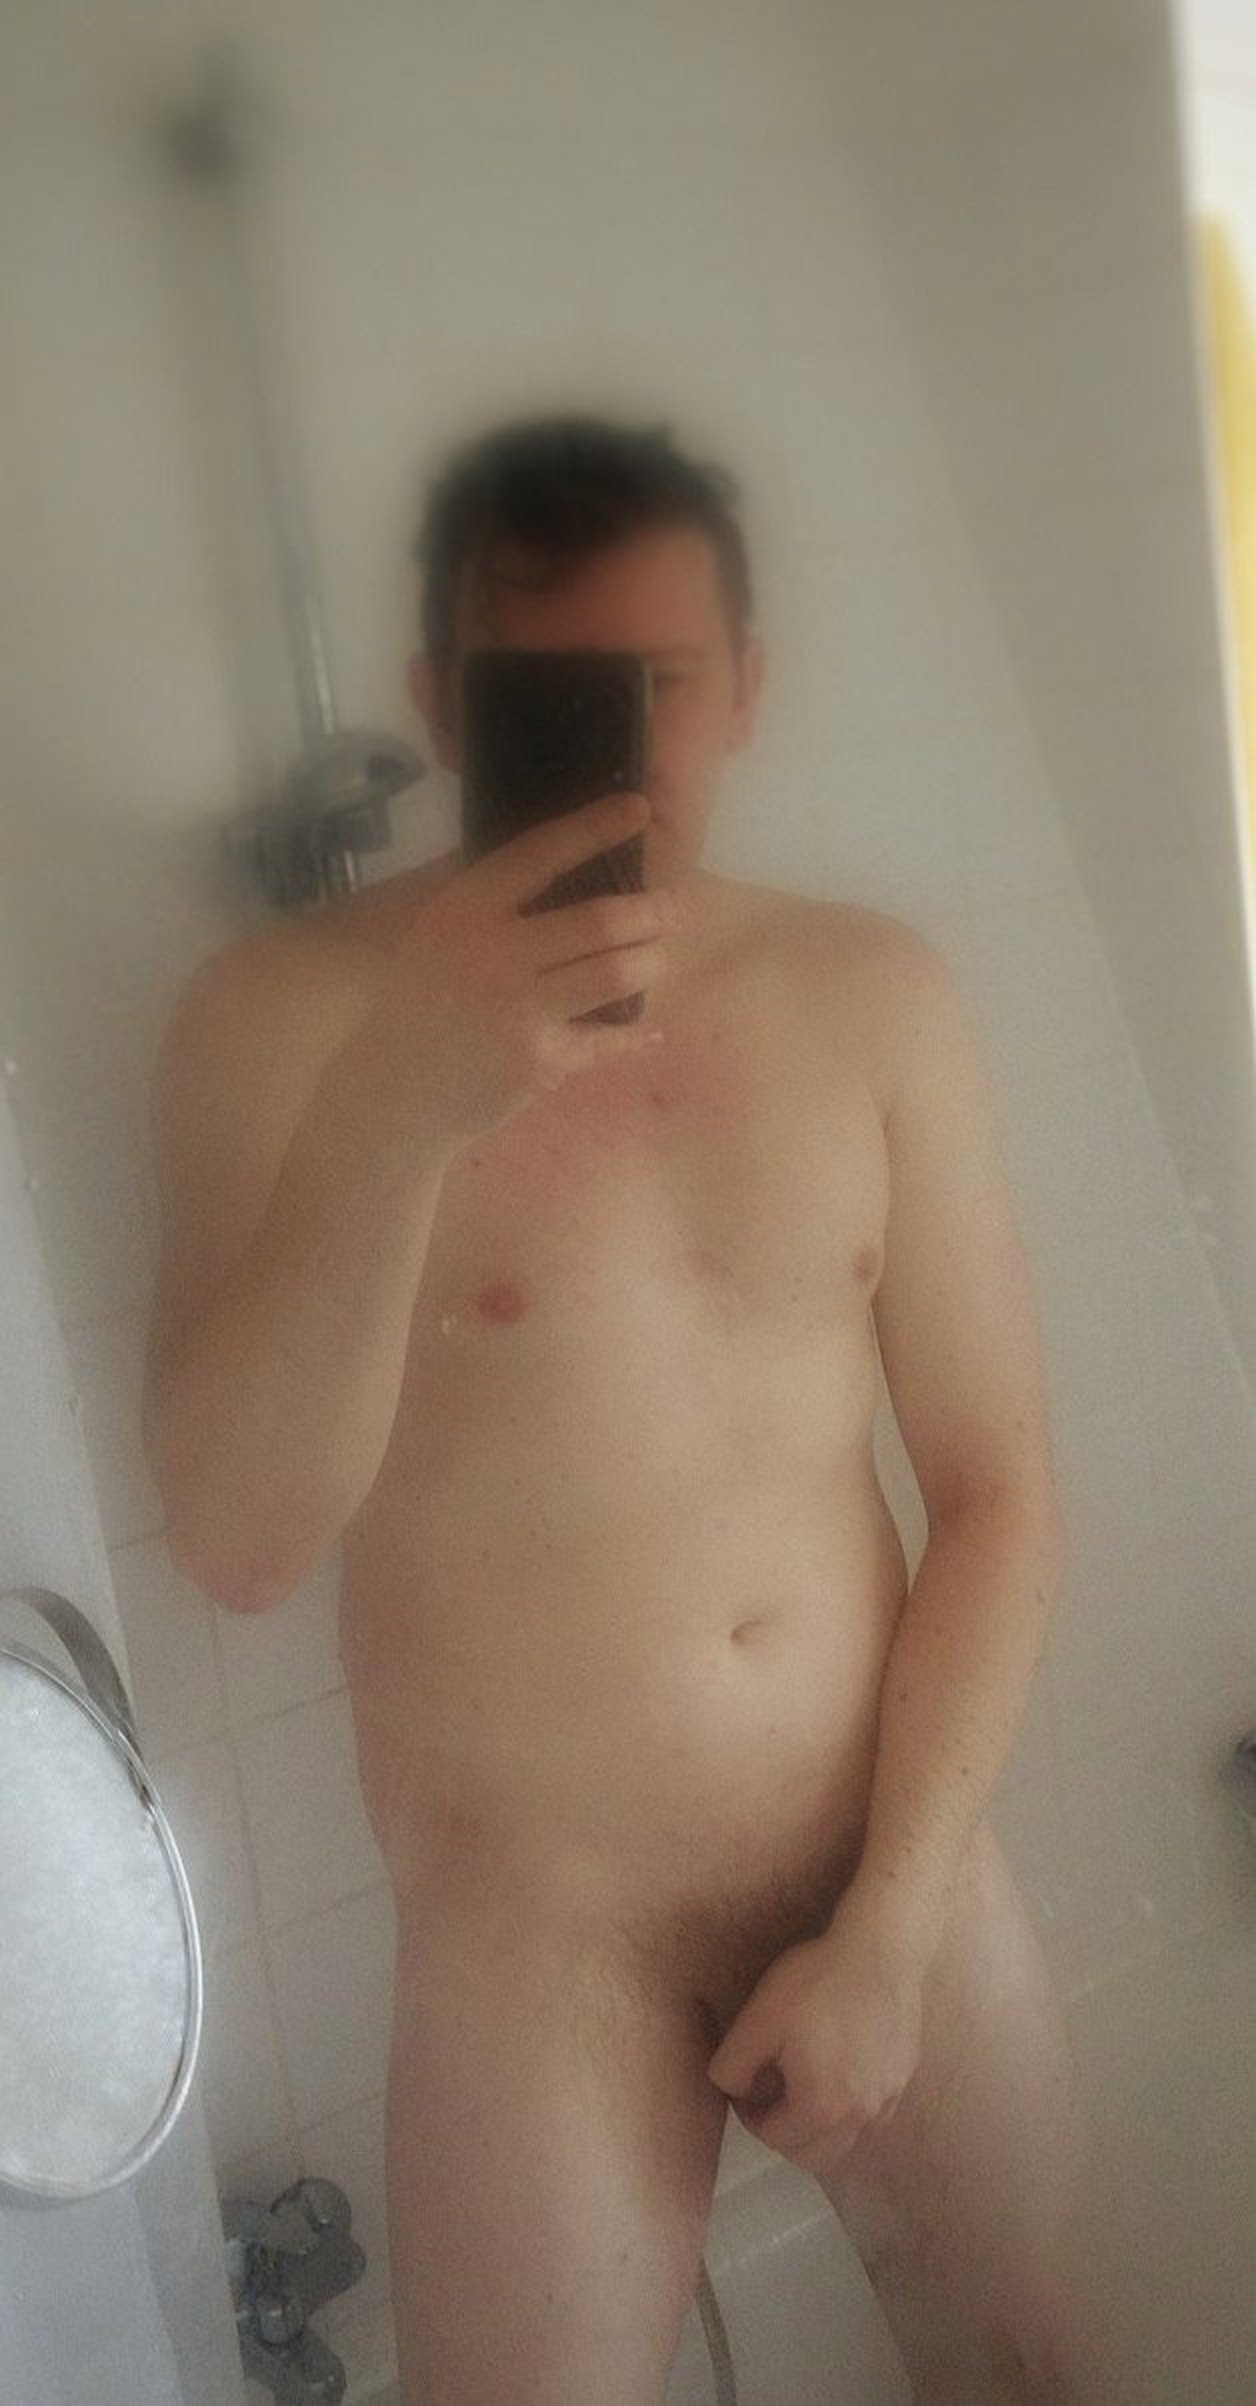 Photo by funguy5180 with the username @funguy5180, who is a verified user,  February 20, 2021 at 12:04 PM. The post is about the topic Sexy Selfhot and the text says 'Nude weekend-greetings from shower, share and follow for more

#funguy5180 #nude #selfie #mirror #shower #ass #dick #boy #guy #german #amateur #homemade #weekend #naughtyweekend'